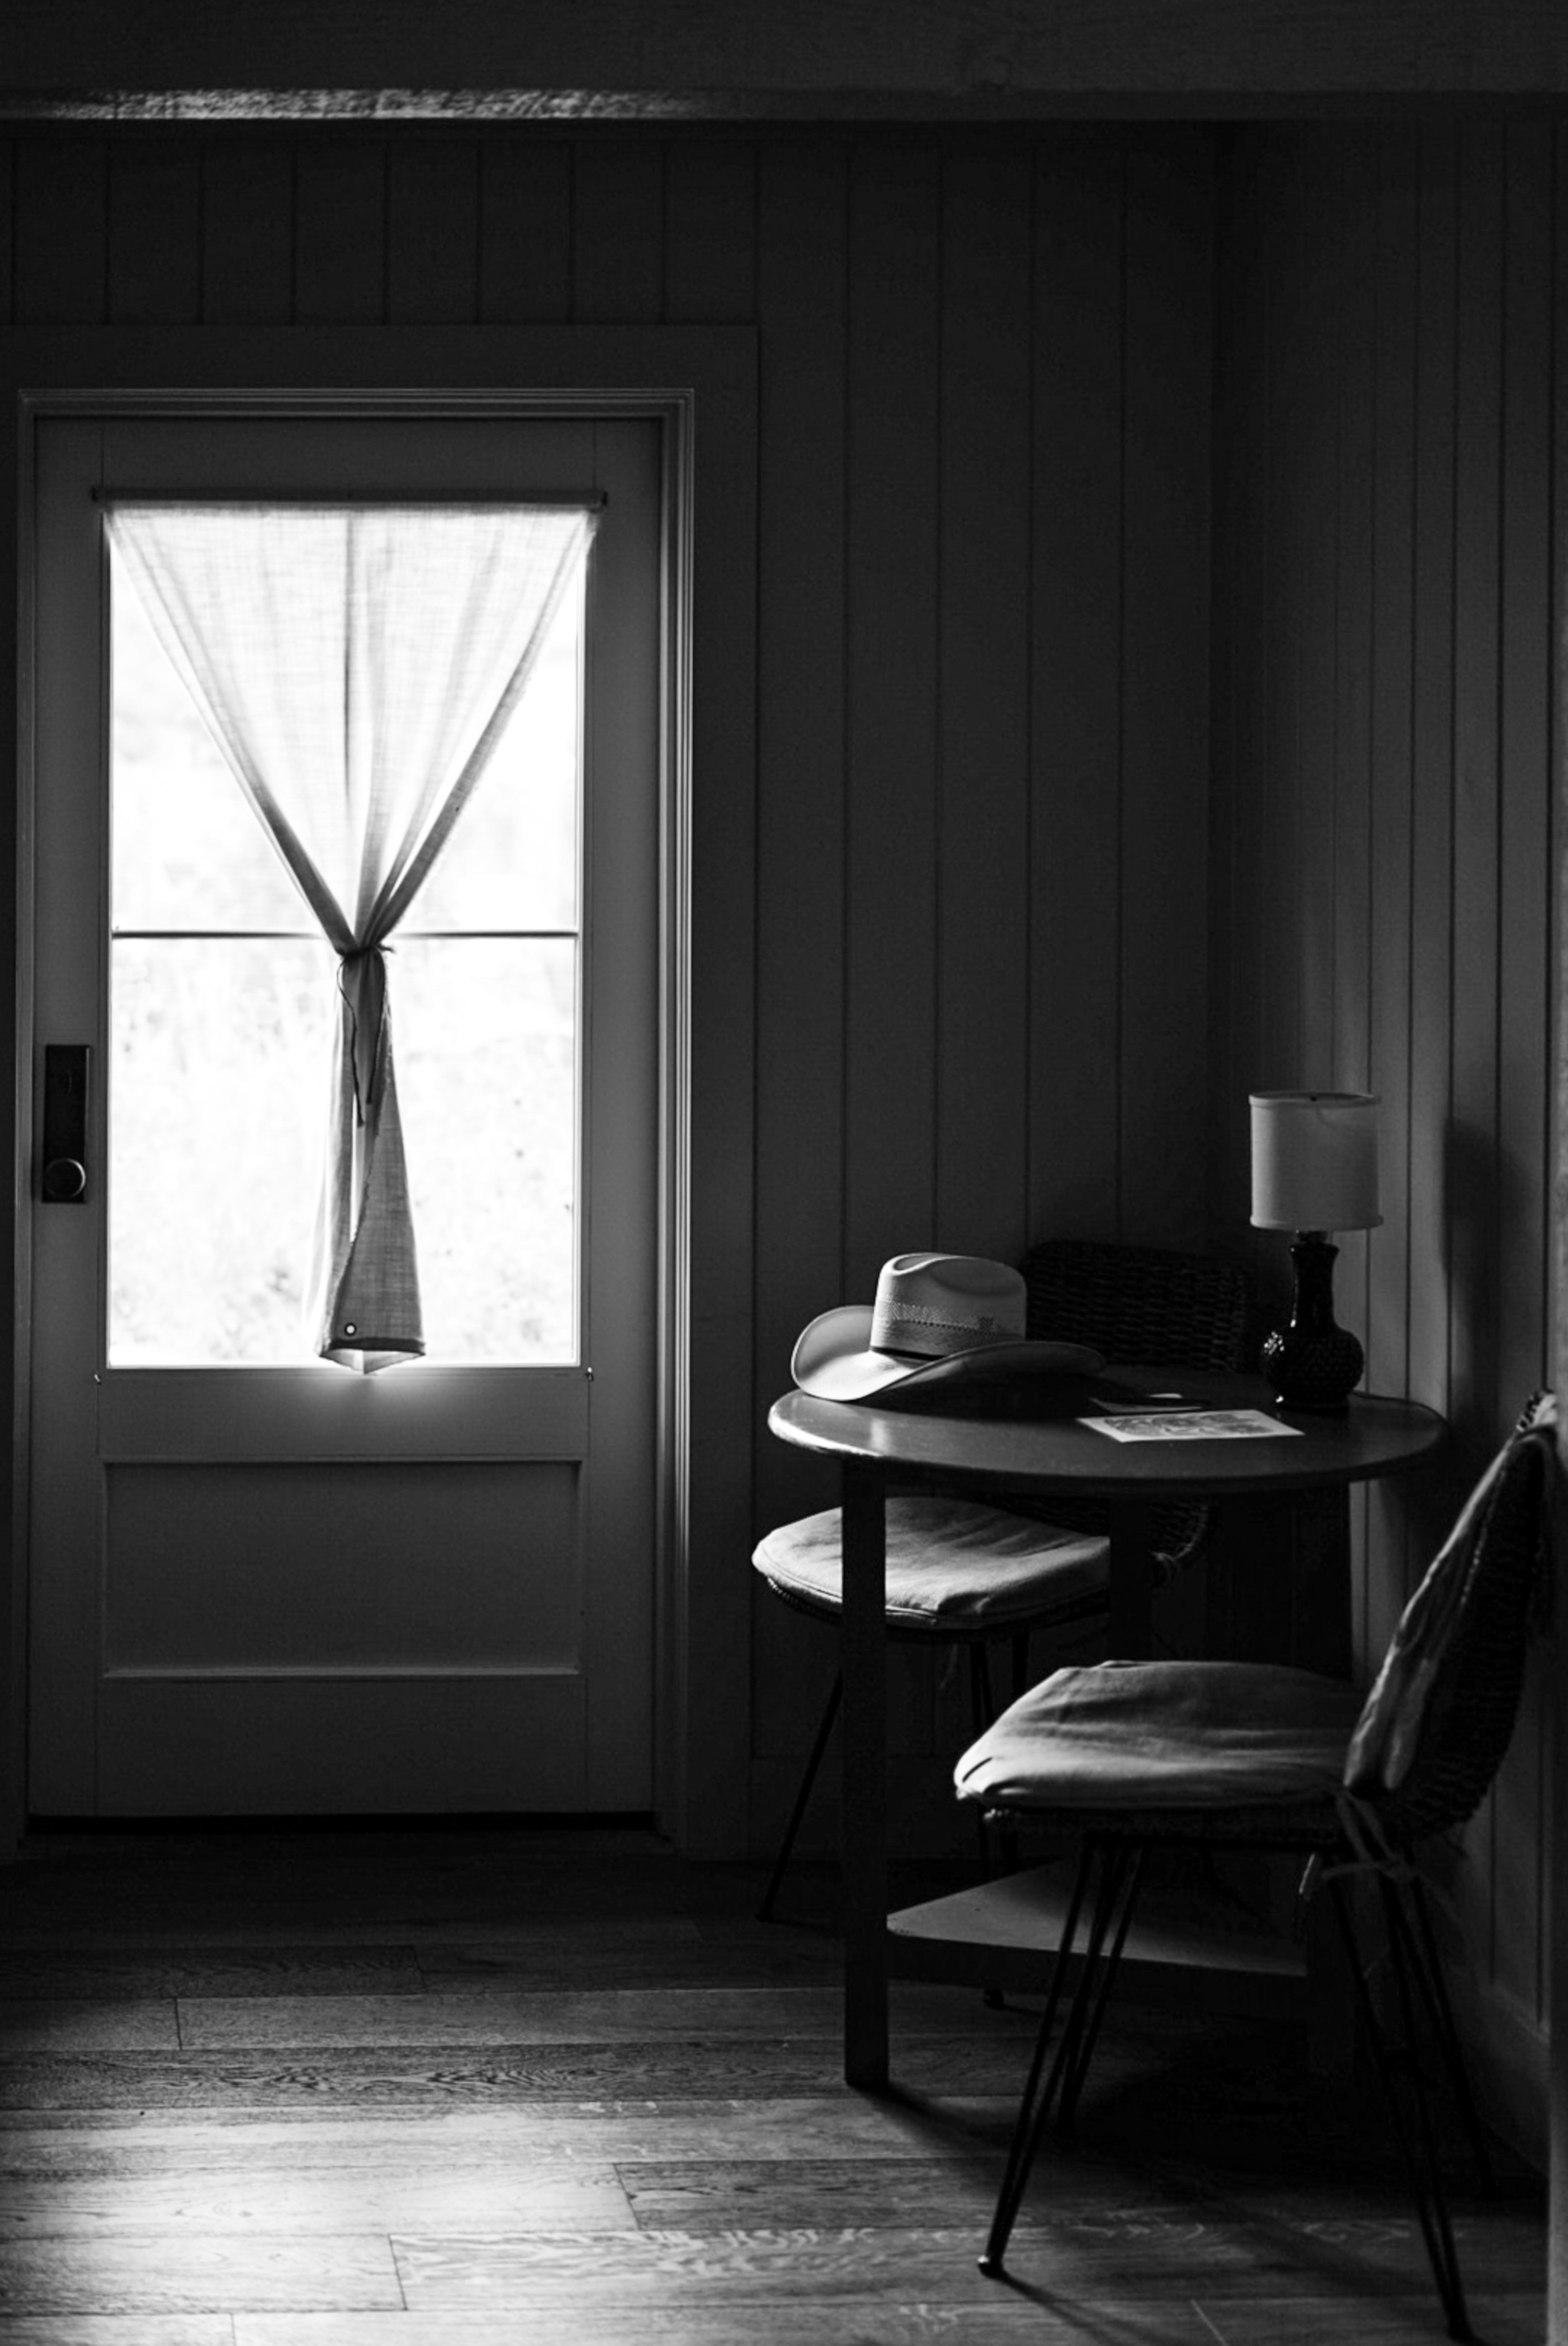 PC Wallpapers interior, miscellanea, miscellaneous, bw, chb, window, room, armchair